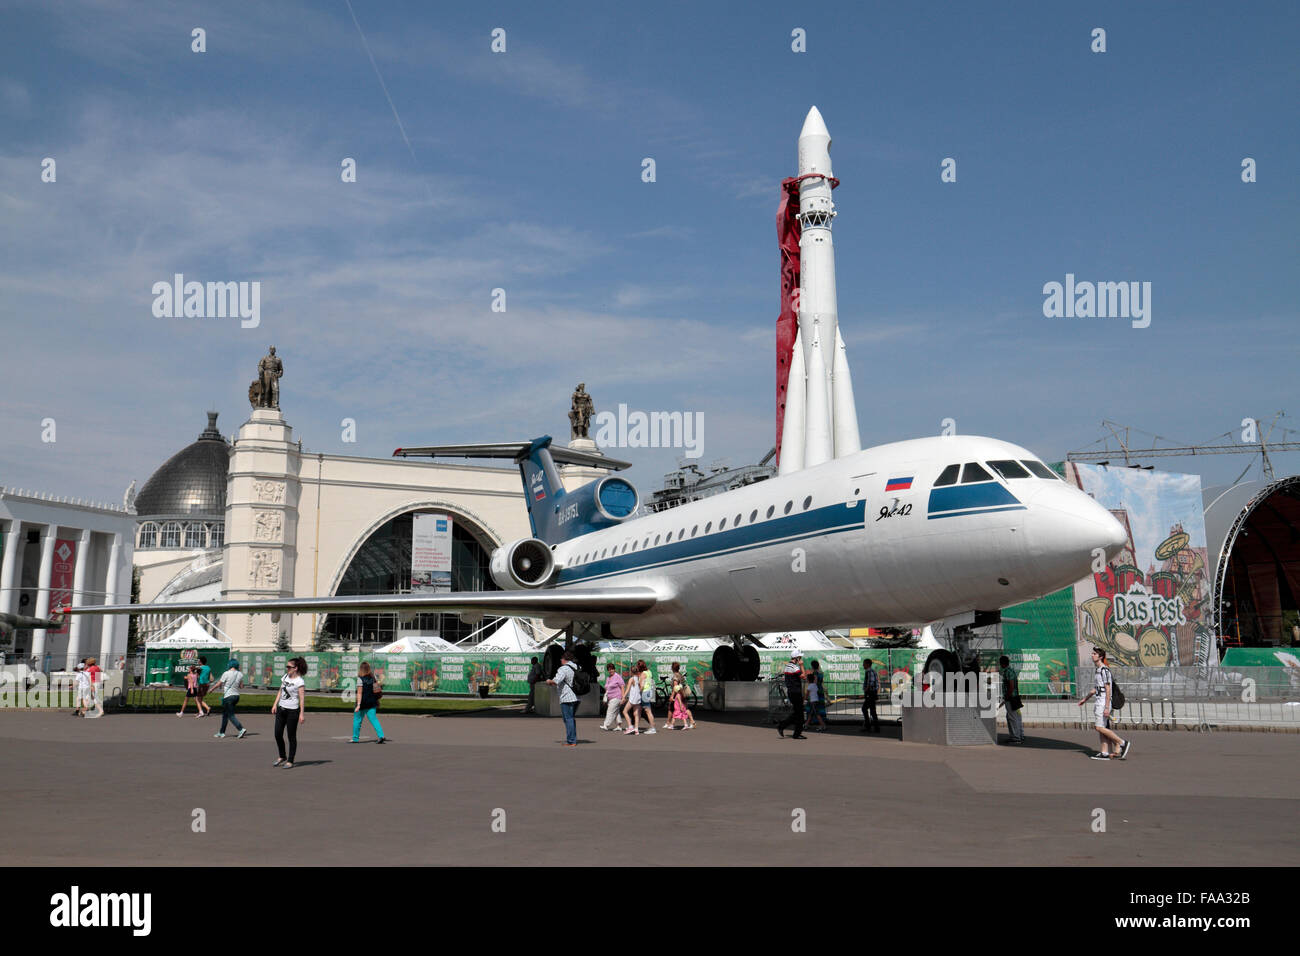 A Yak-42 plane and Vostok rocket in VDNKh, Moscow, Russia. Stock Photo